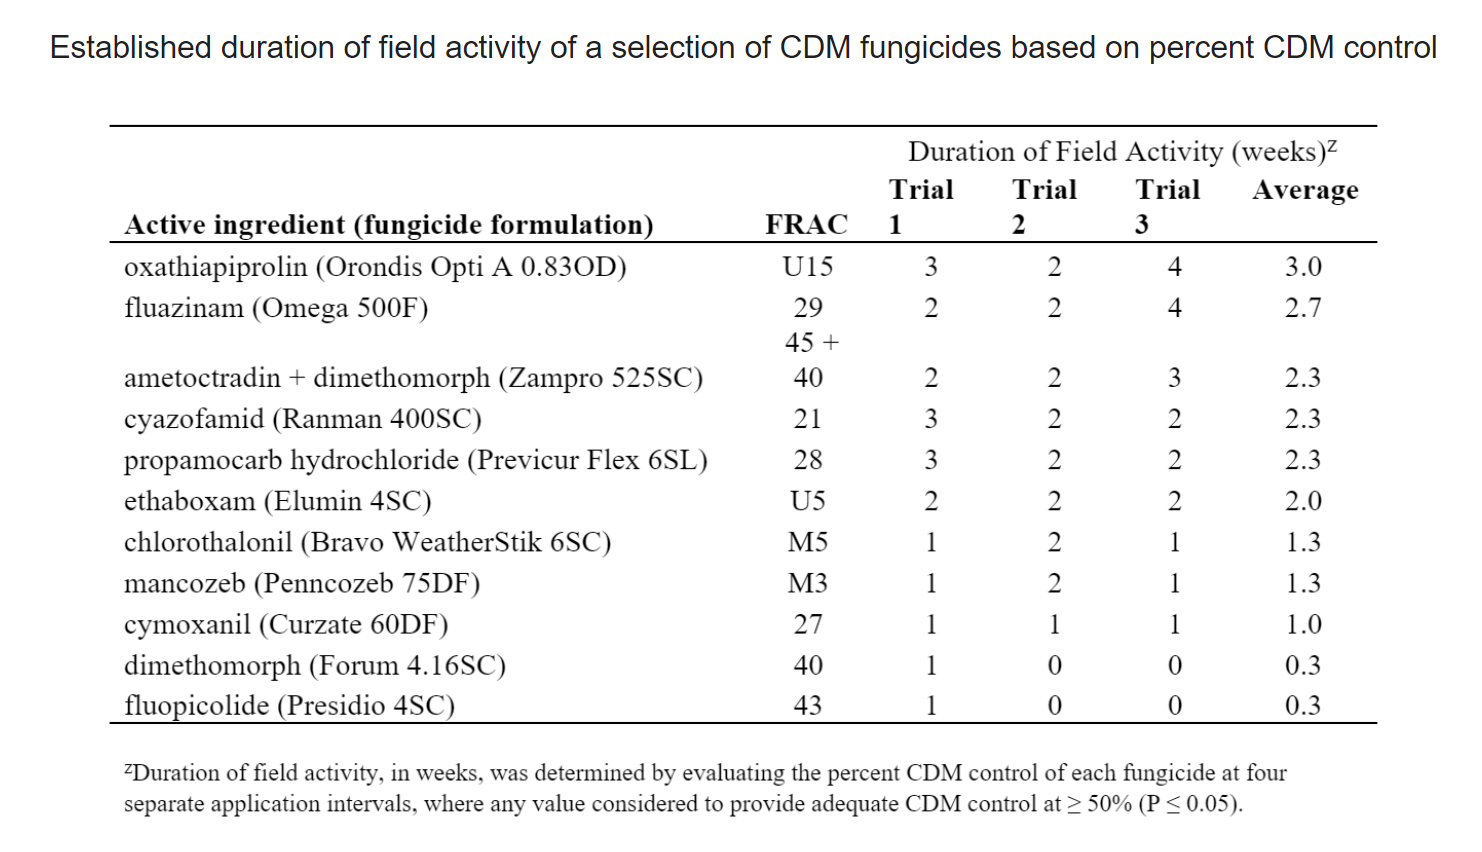 Duration of field activity, in weeks, was determined by evaluating the percent CDM control of each fungicide at four separate application intervals